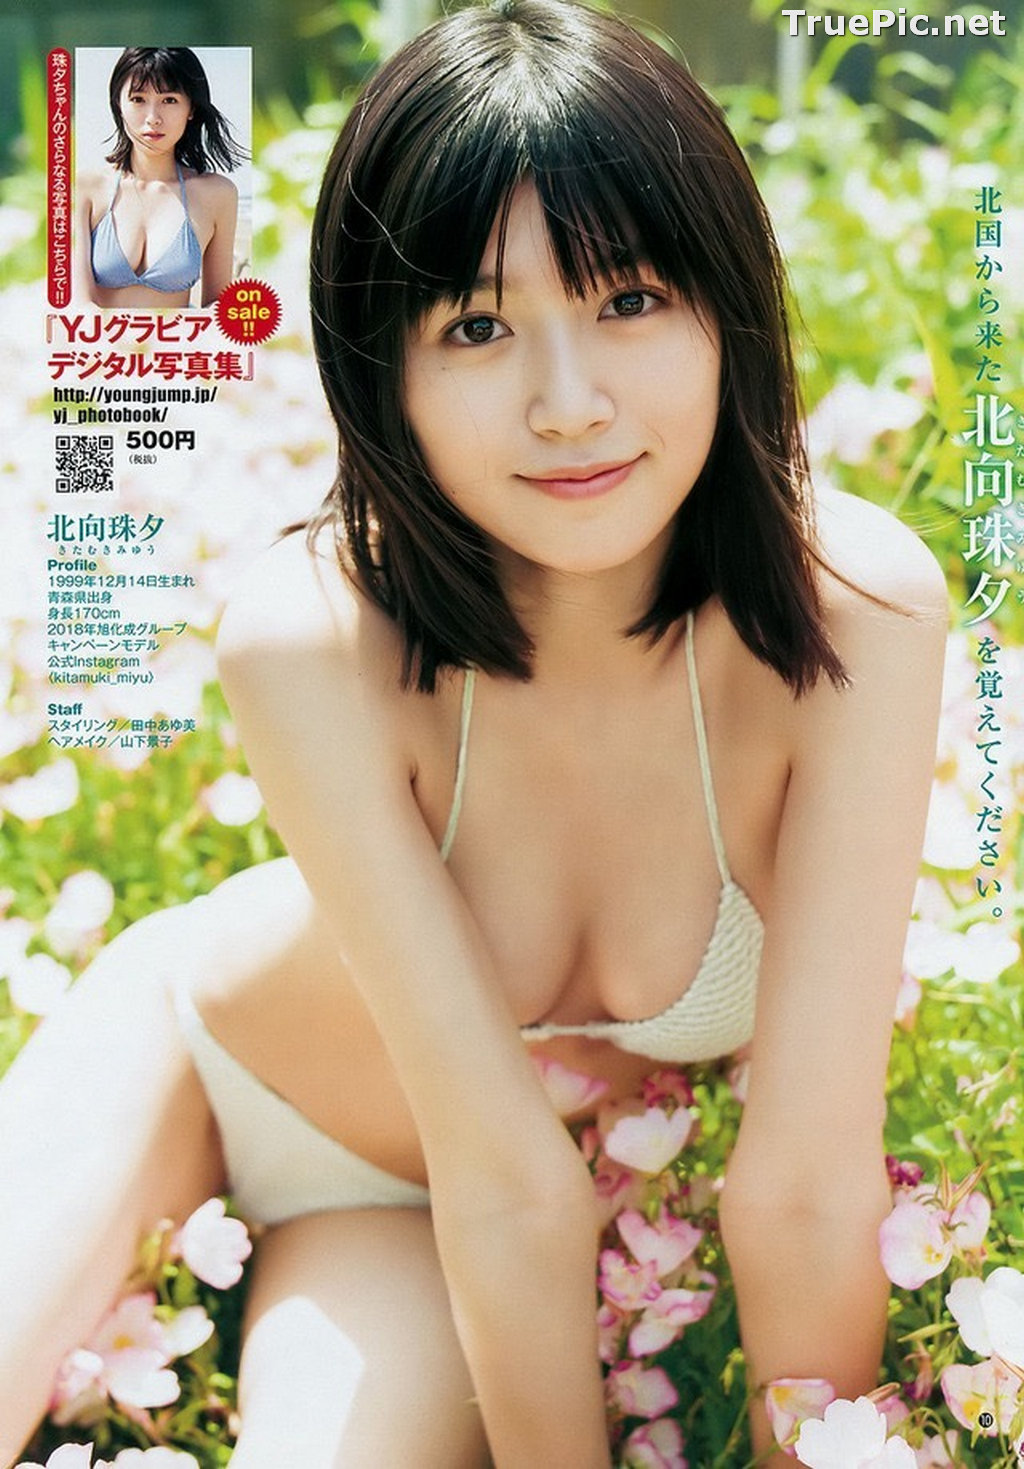 ImageJapanese Gravure Idol and Actress - Kitamuki Miyu (北向珠夕) - Sexy Picture Collection 2020 - TruePic.net - Picture-64